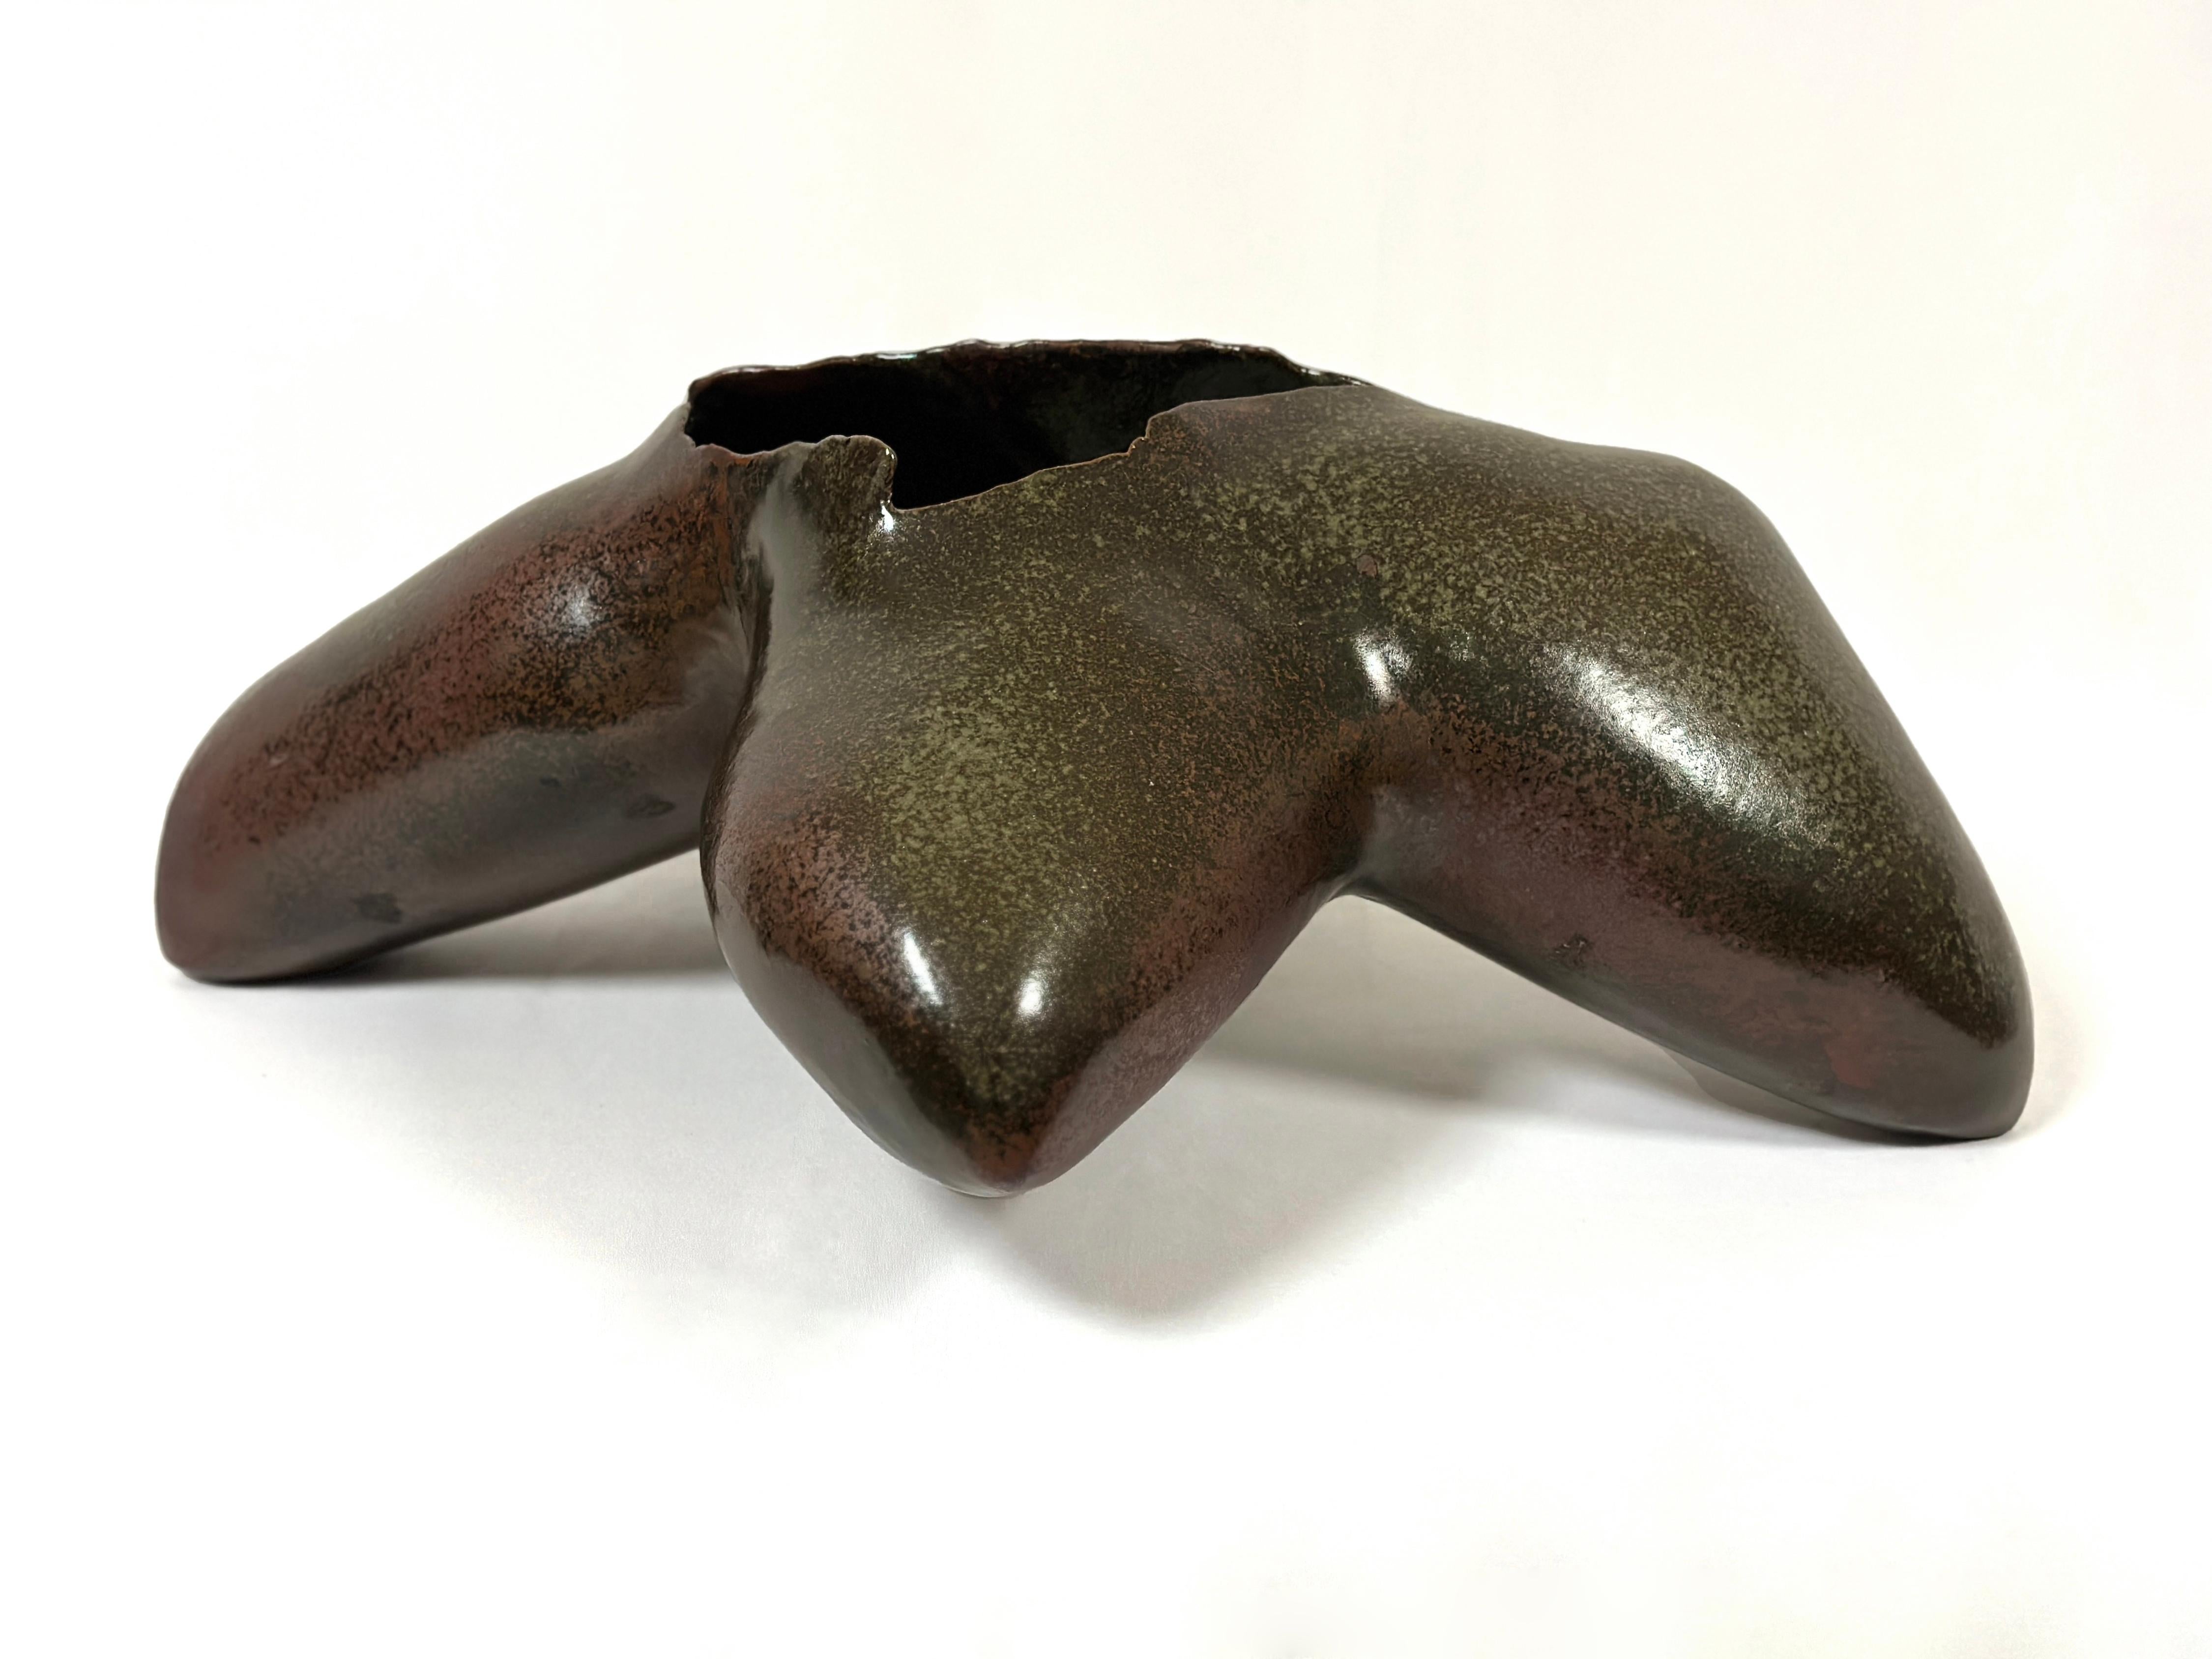 KAZUO TAKIGUCHI (b.1953)
Amoeboid Brown, 2003
Stoneware 
7 x 17 x 22 inches  
With artist signed tomobako

Provenance
Artist's studio
Eric Zetterquist, NYC
Private collection, MA

His sculptural process is both complicated and highly creative. Using